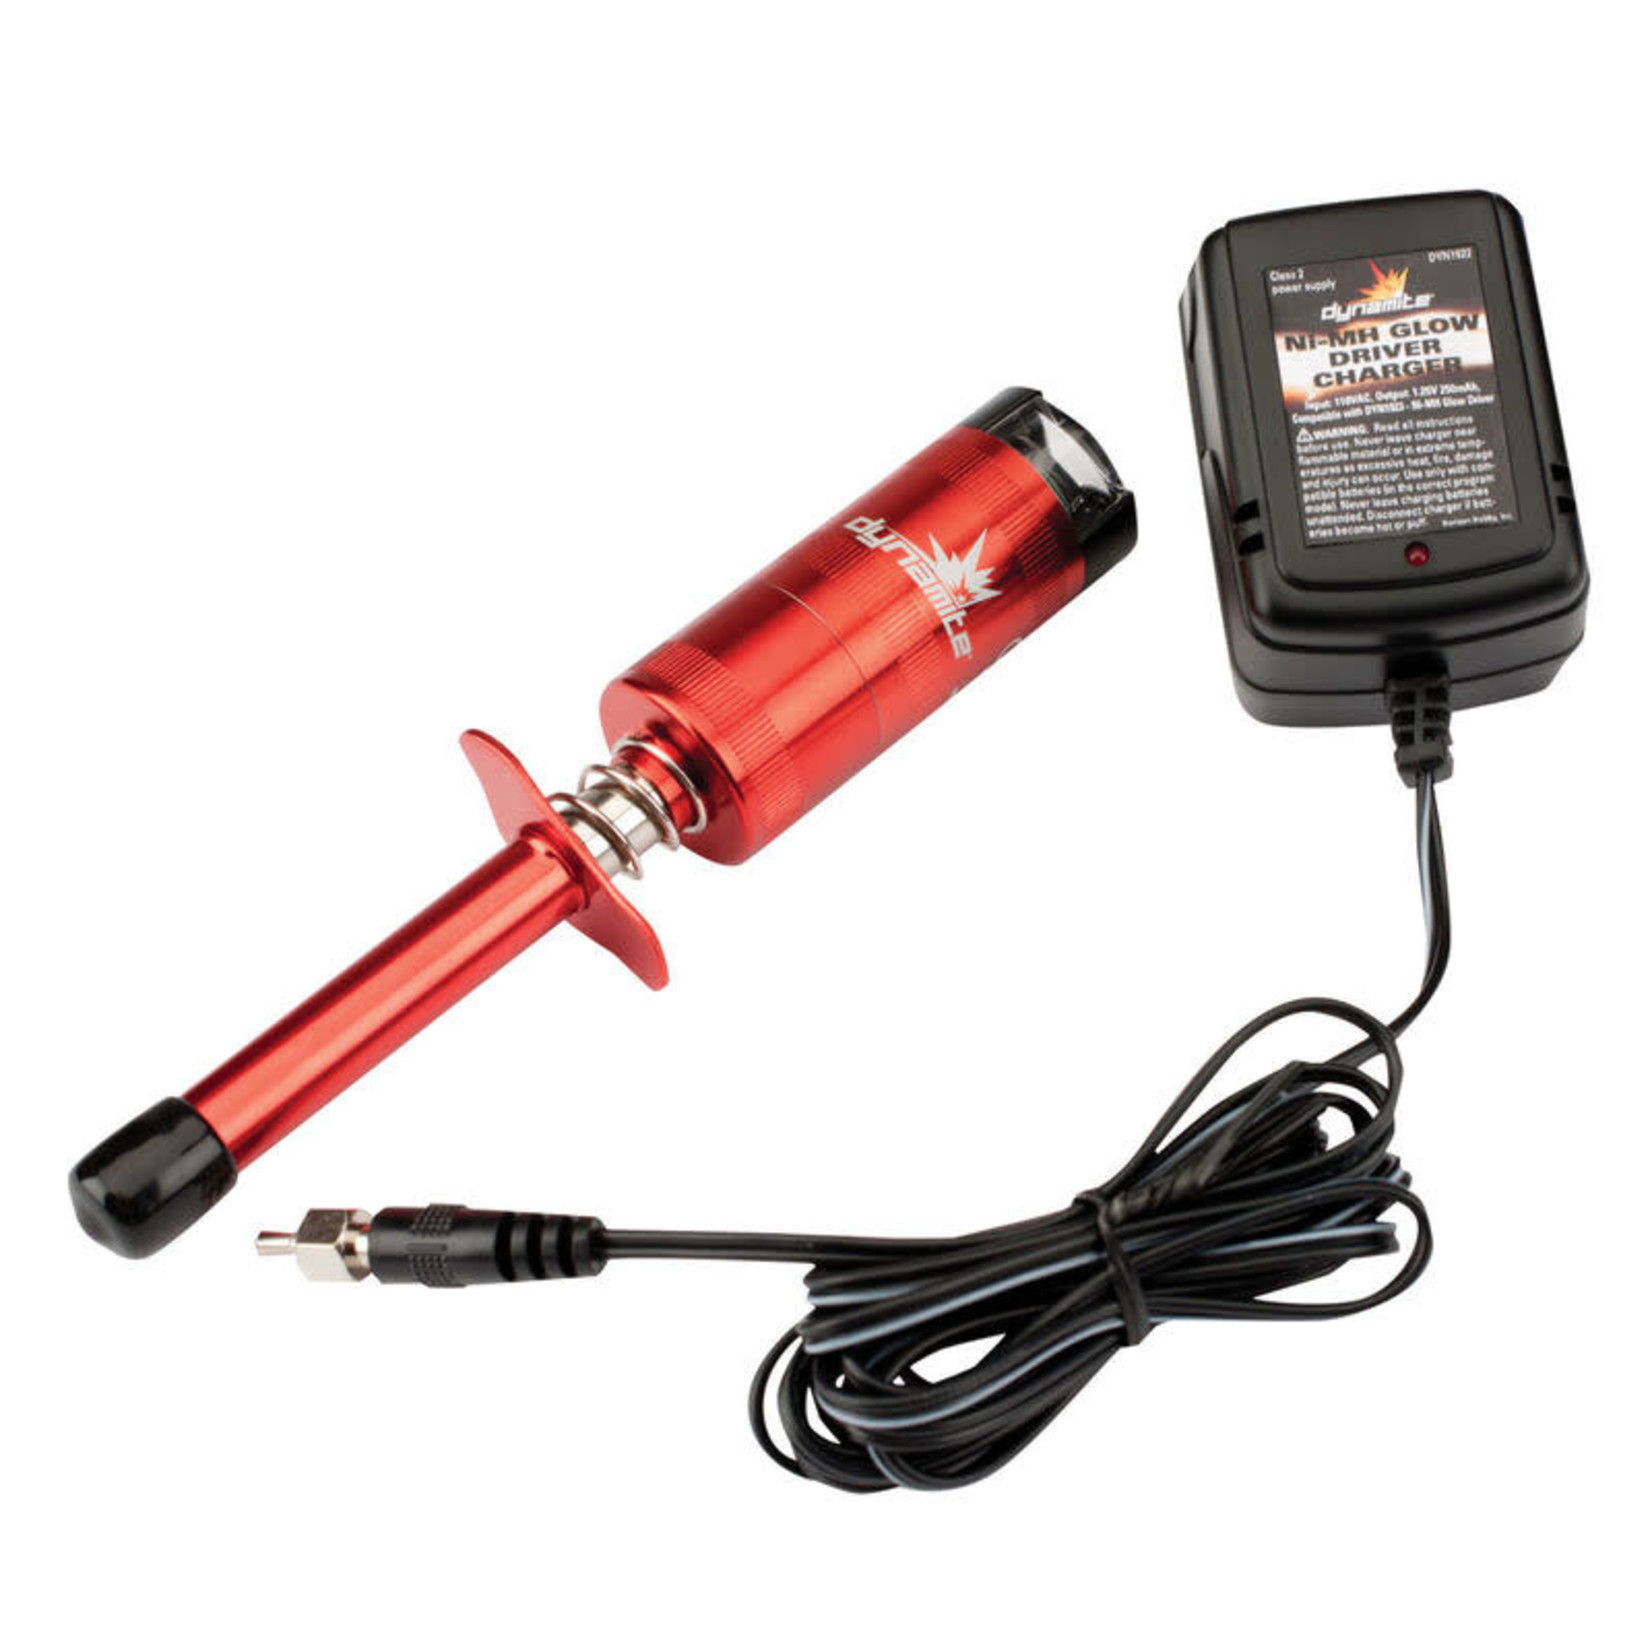 Dynamite Dynamite Metered Glow Driver with 2600mAh Ni-MH & Charger #DYN1922